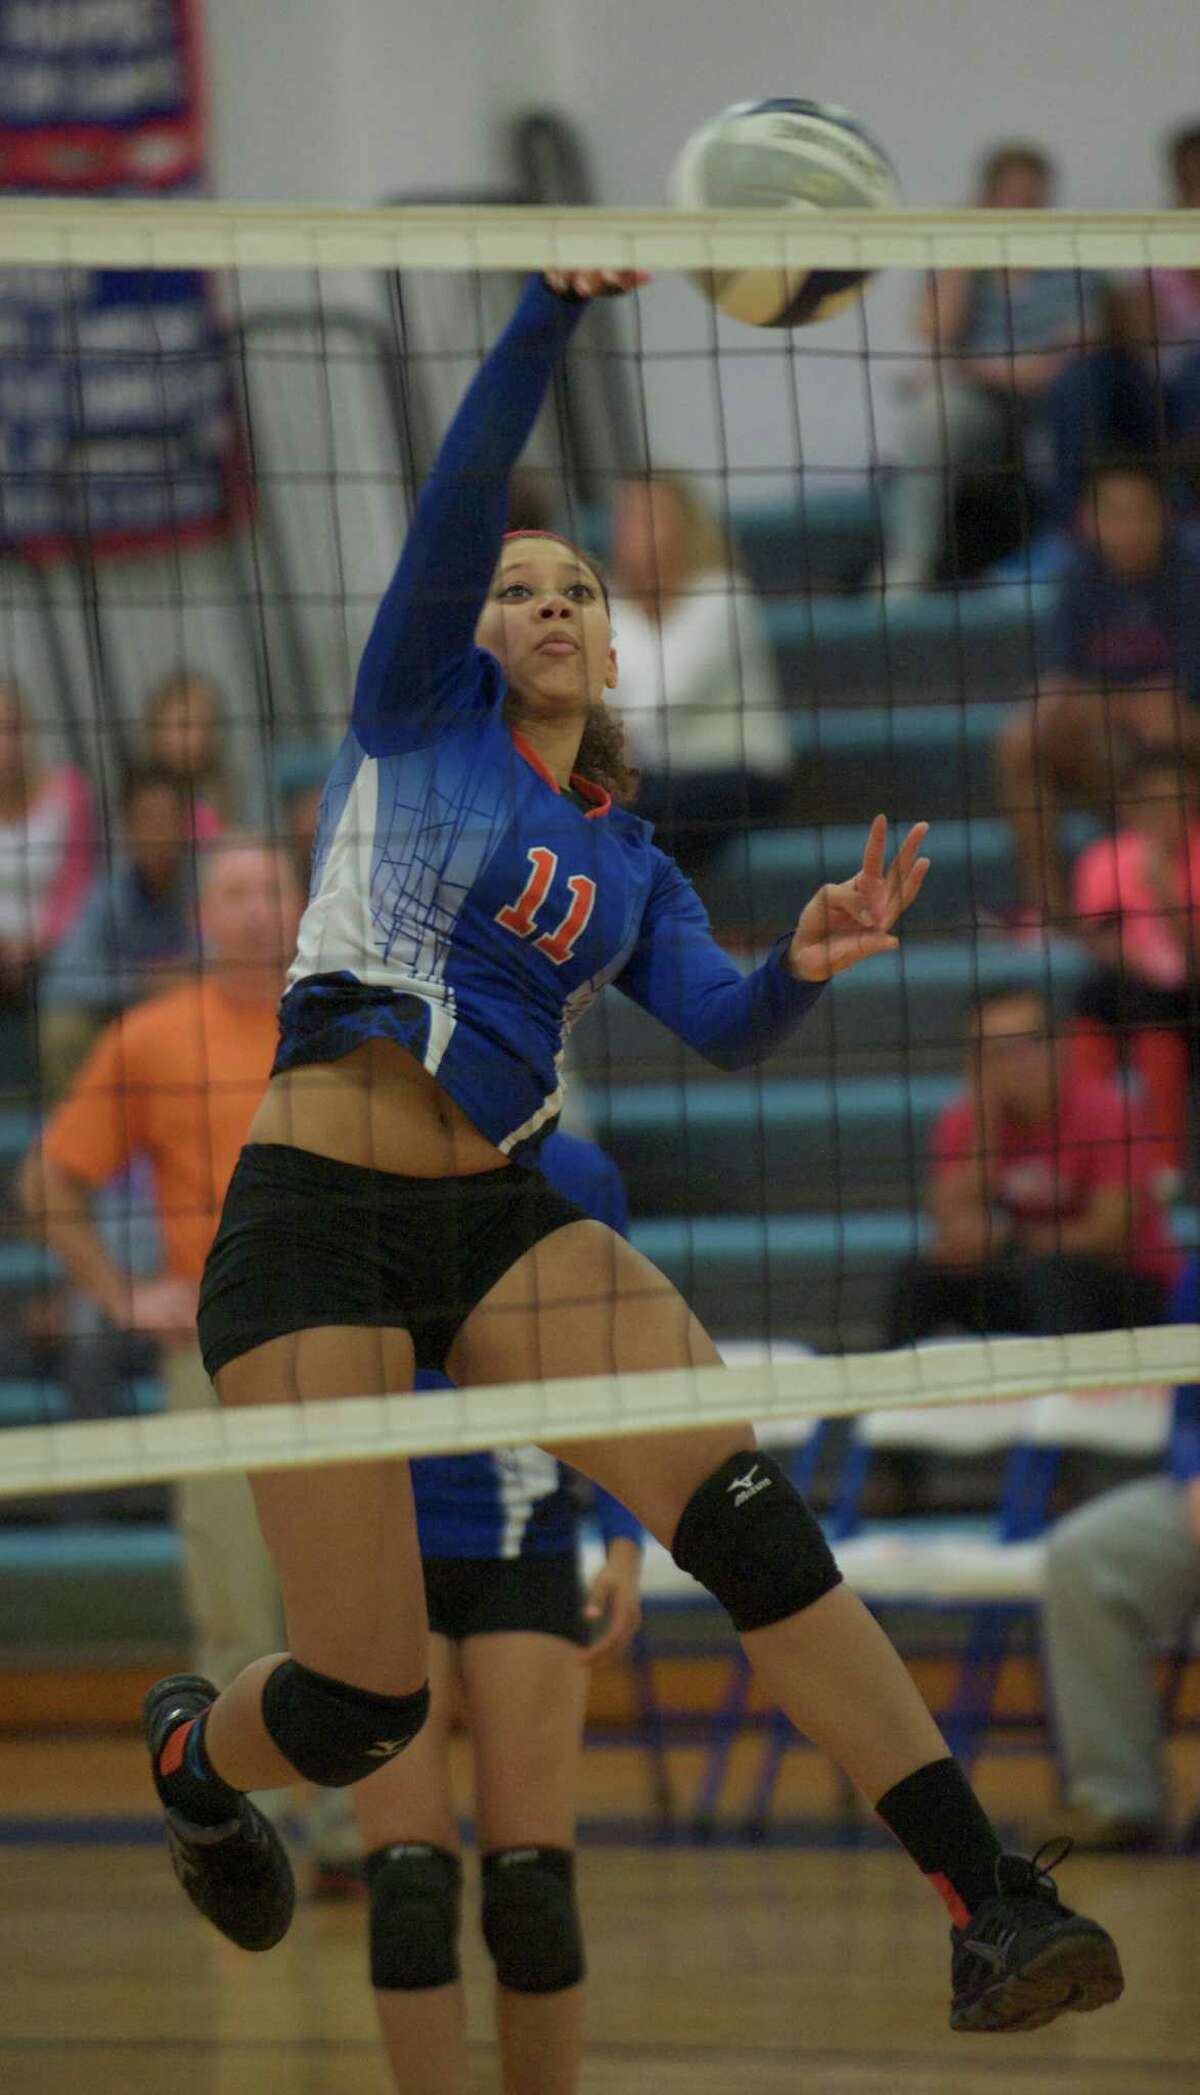 Danbury's Jocelyn Perez, 11, spikes the ball during the Stamford High School and Danbury High School girls volleyball match, played at Danbury High School, Danbury, Conn, on Wednesday, September 17, 2014. Stamford won the match 3 games to 1.